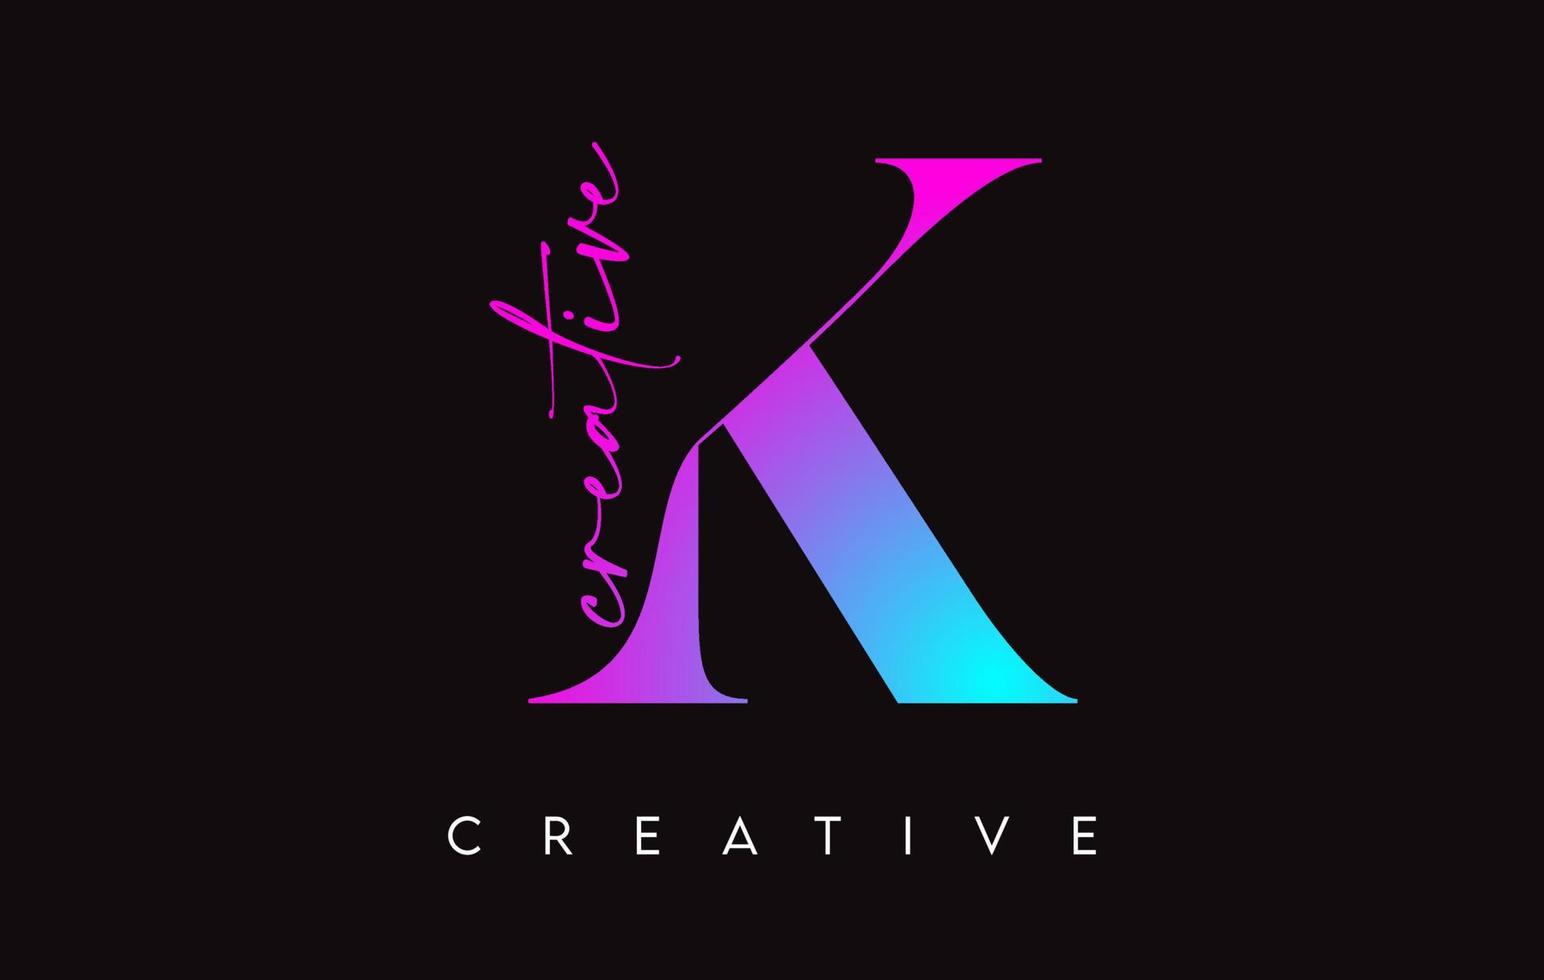 K Letter Design with Creative Cut and Serif Font in Purple Blue Colors Vector